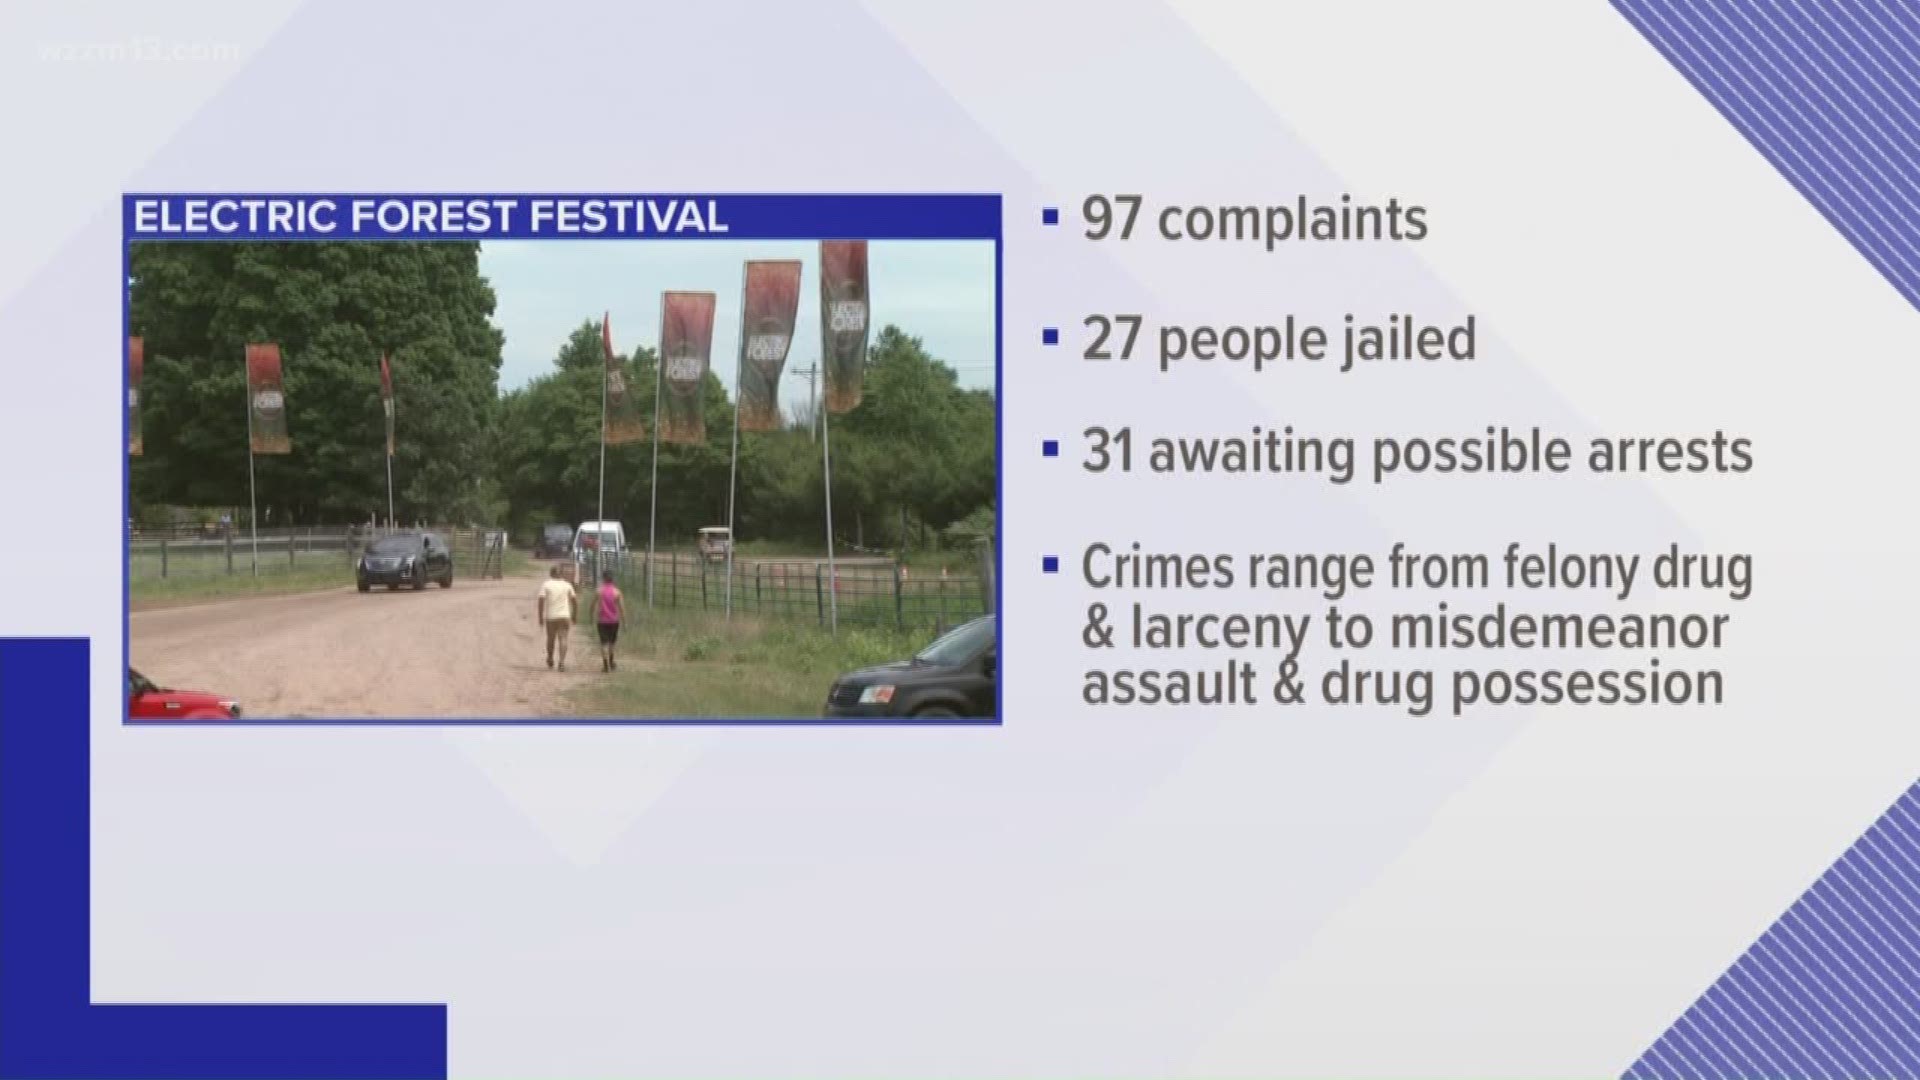 27 people arrested at Electric Forest